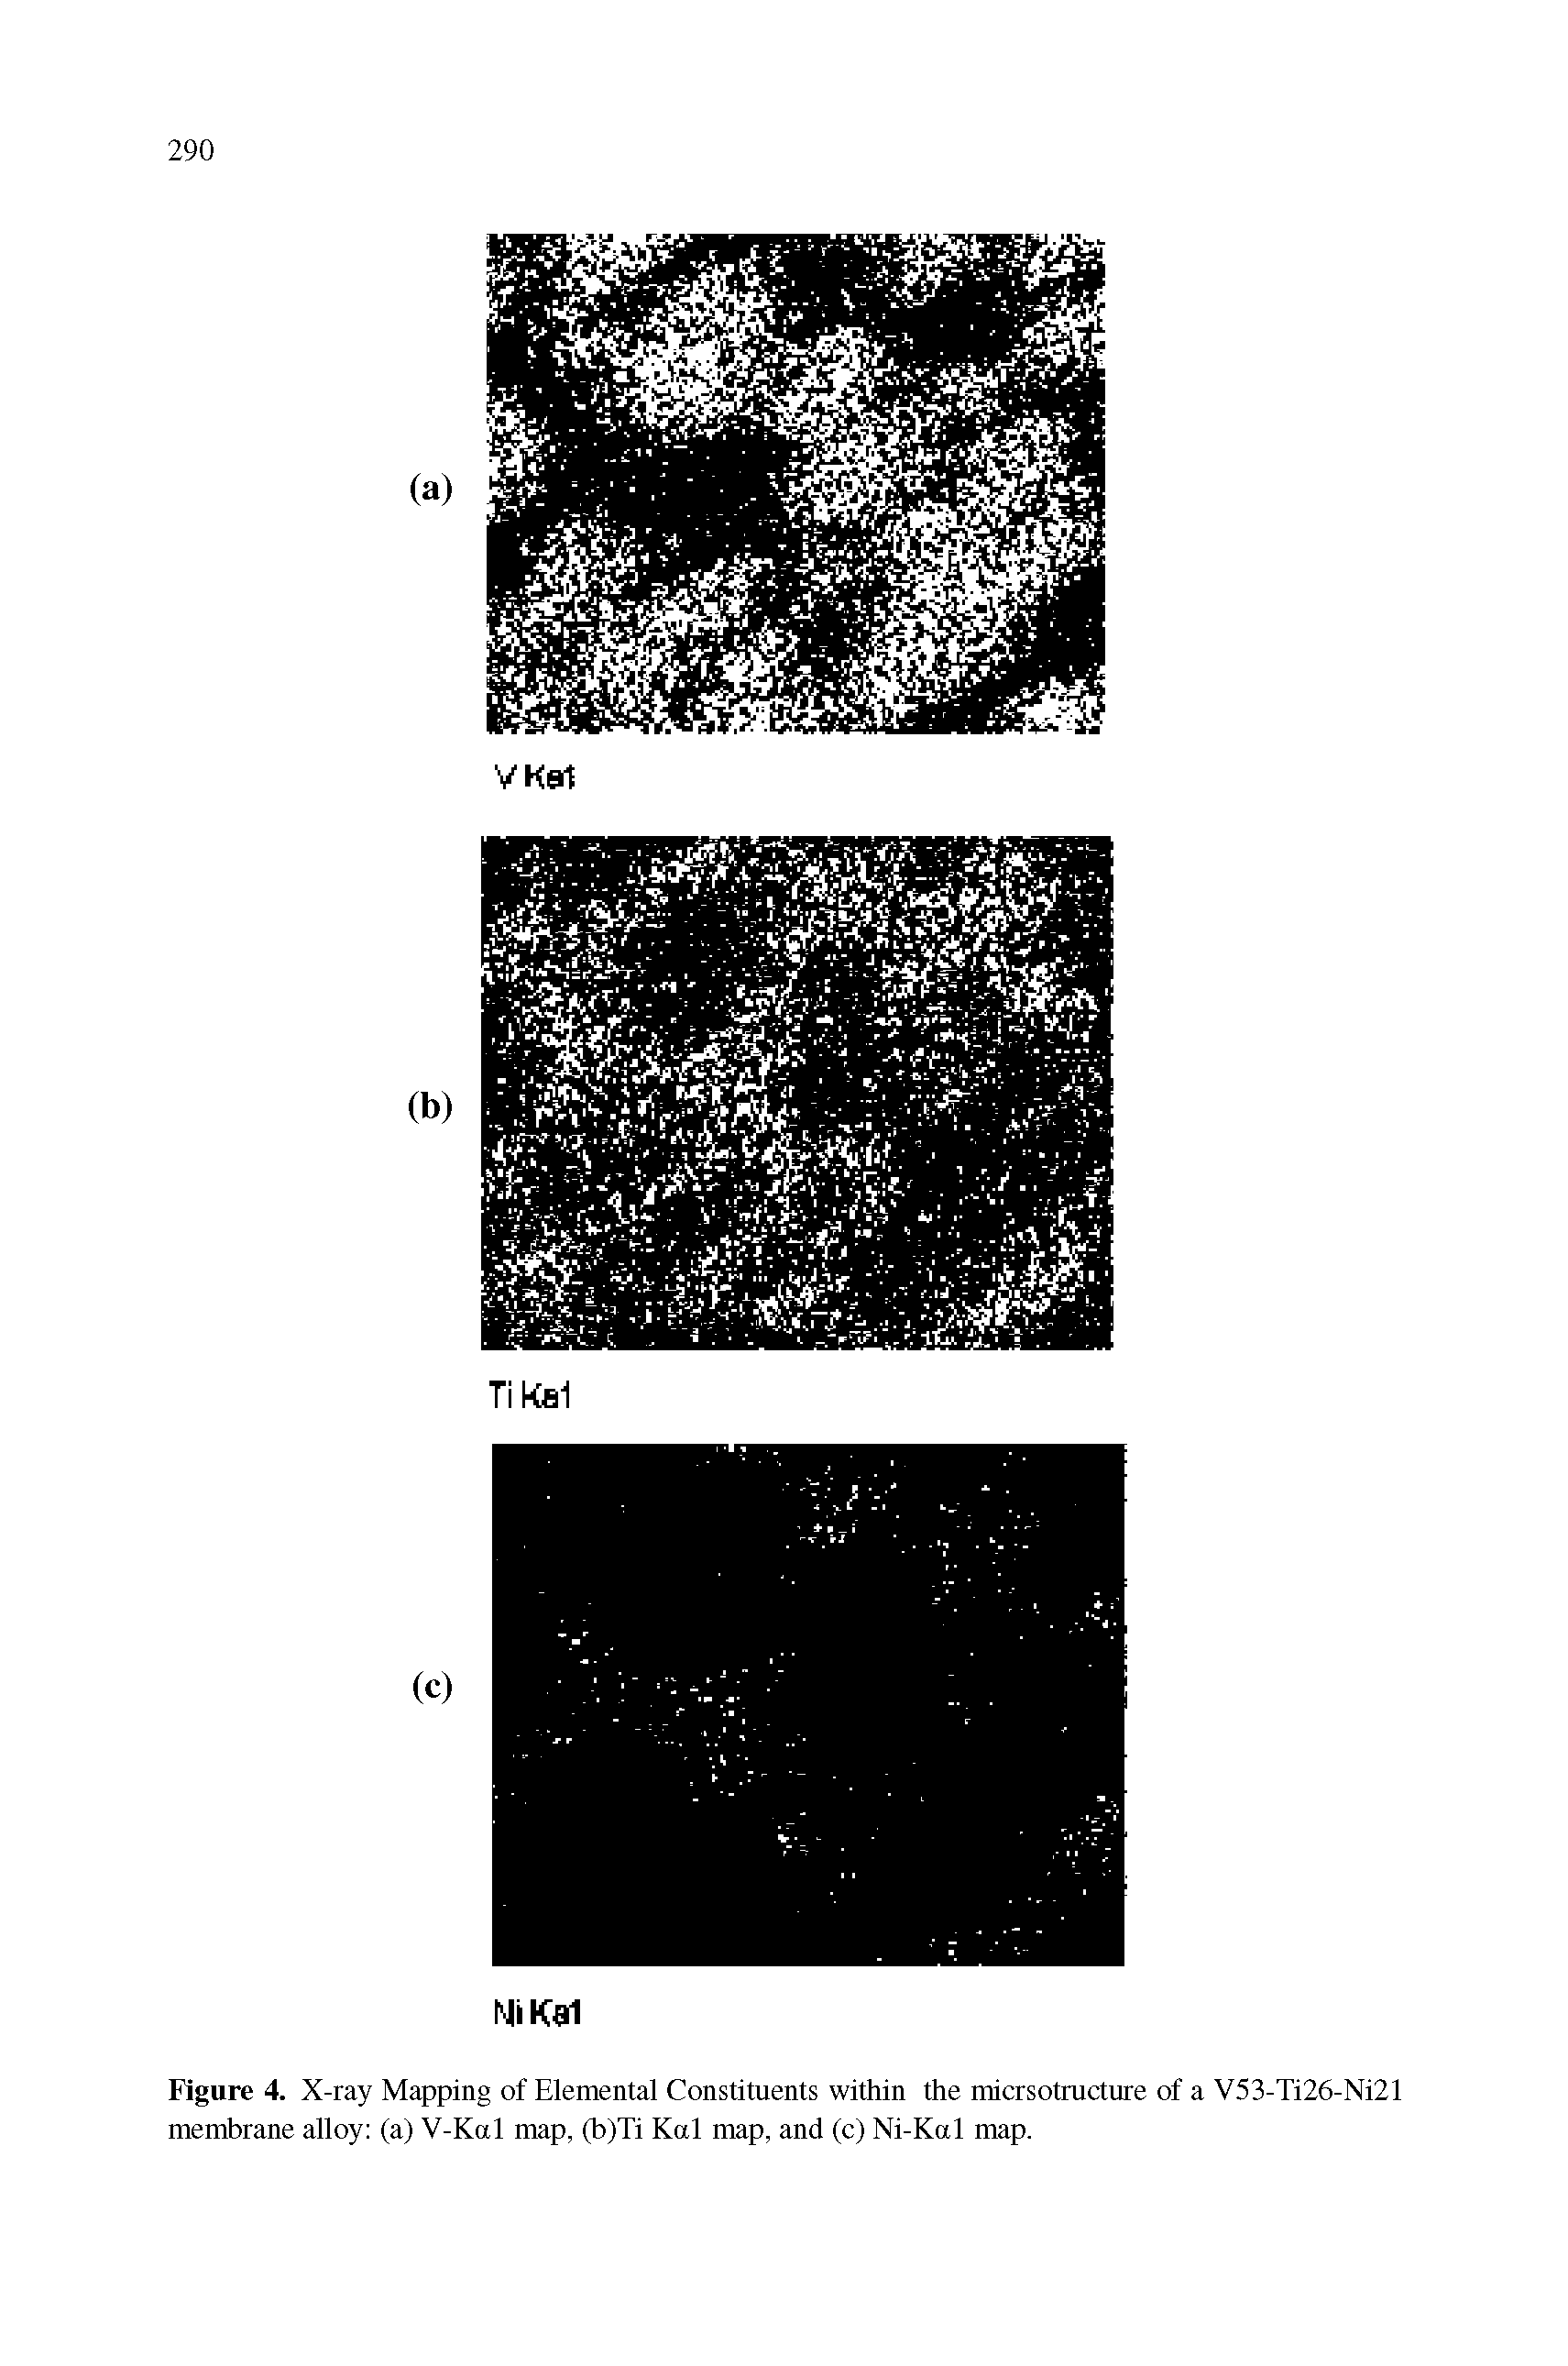 Figure 4. X-ray Mapping of Elemental Constituents within the micrsotructure of a V53-Ti26-Ni21 membrane alloy (a) V-Kal map, (b)Ti Kal map, and (c) Ni-Kal map.